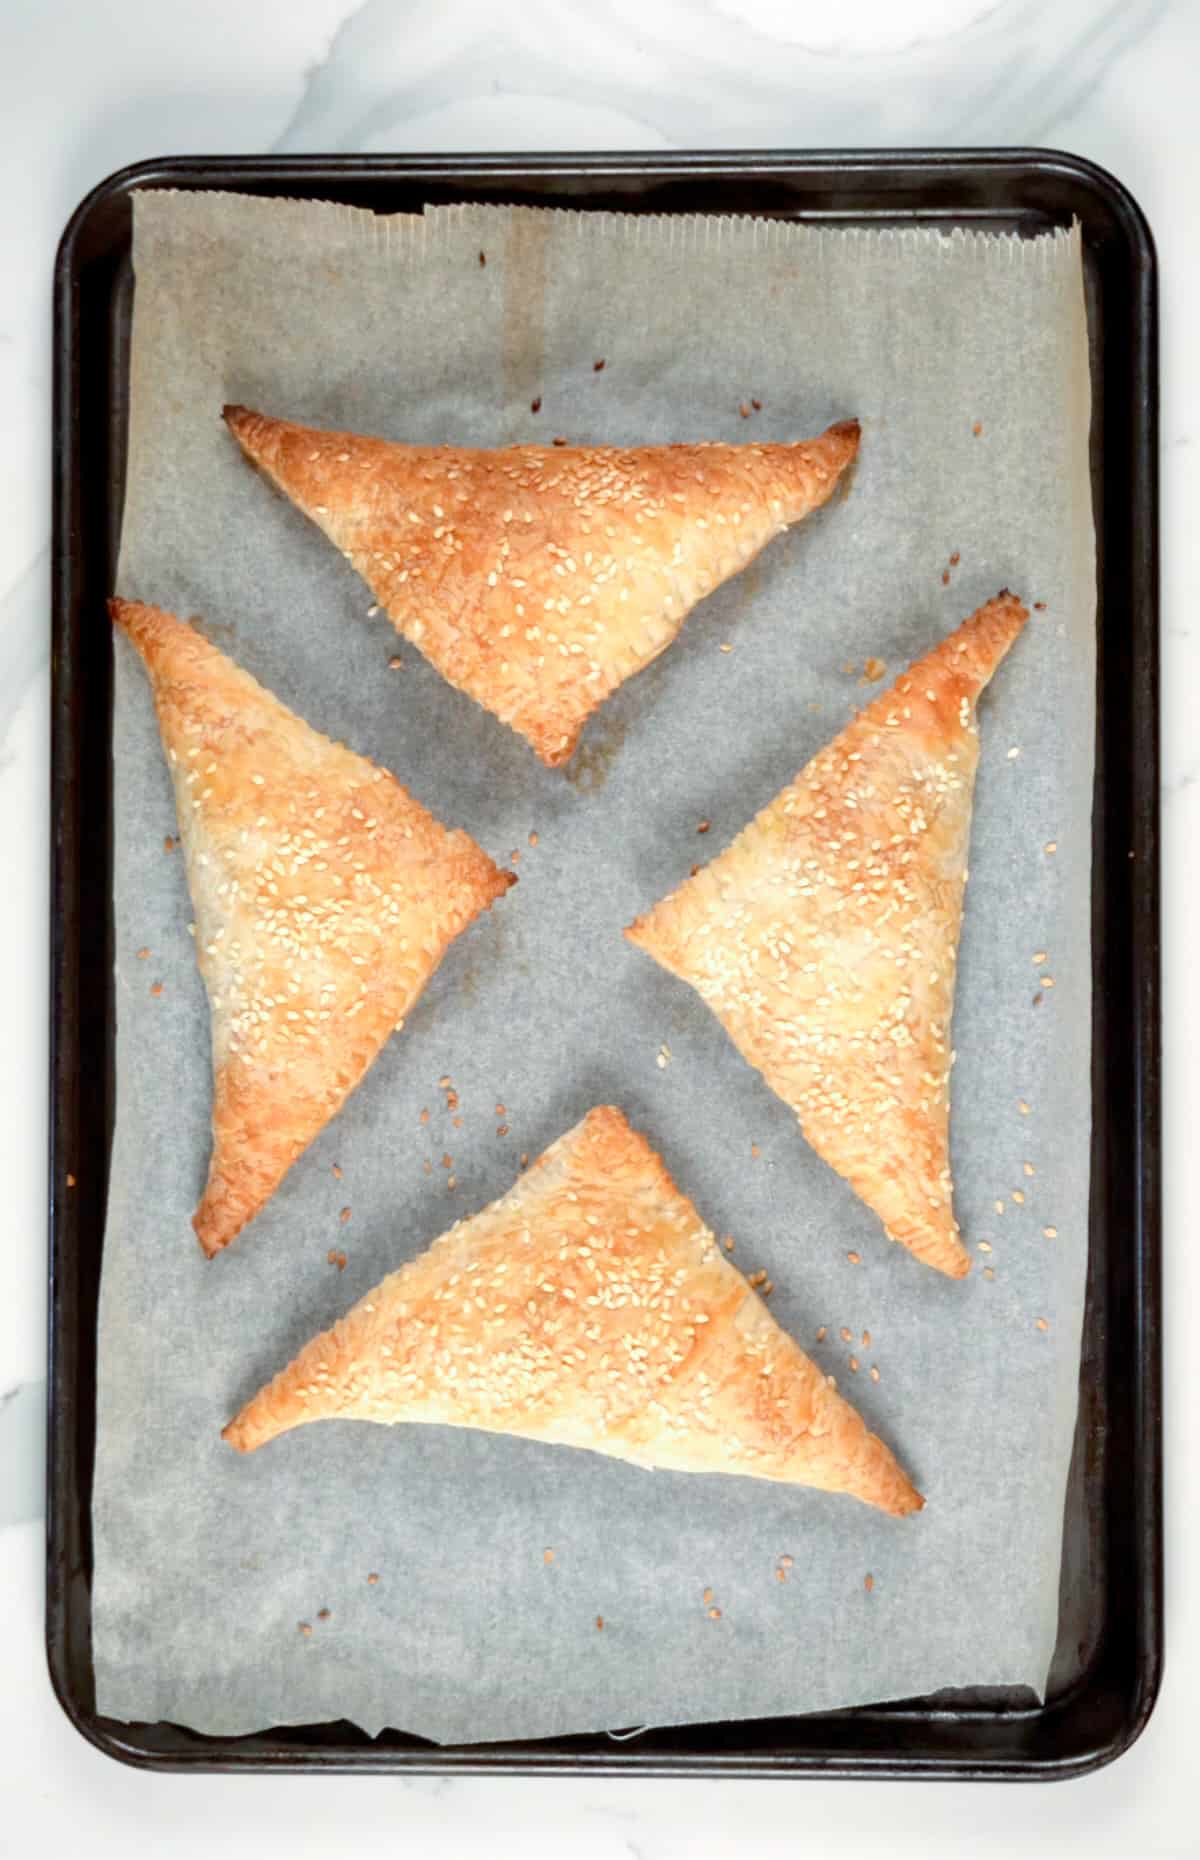 four cooked triangle pastries